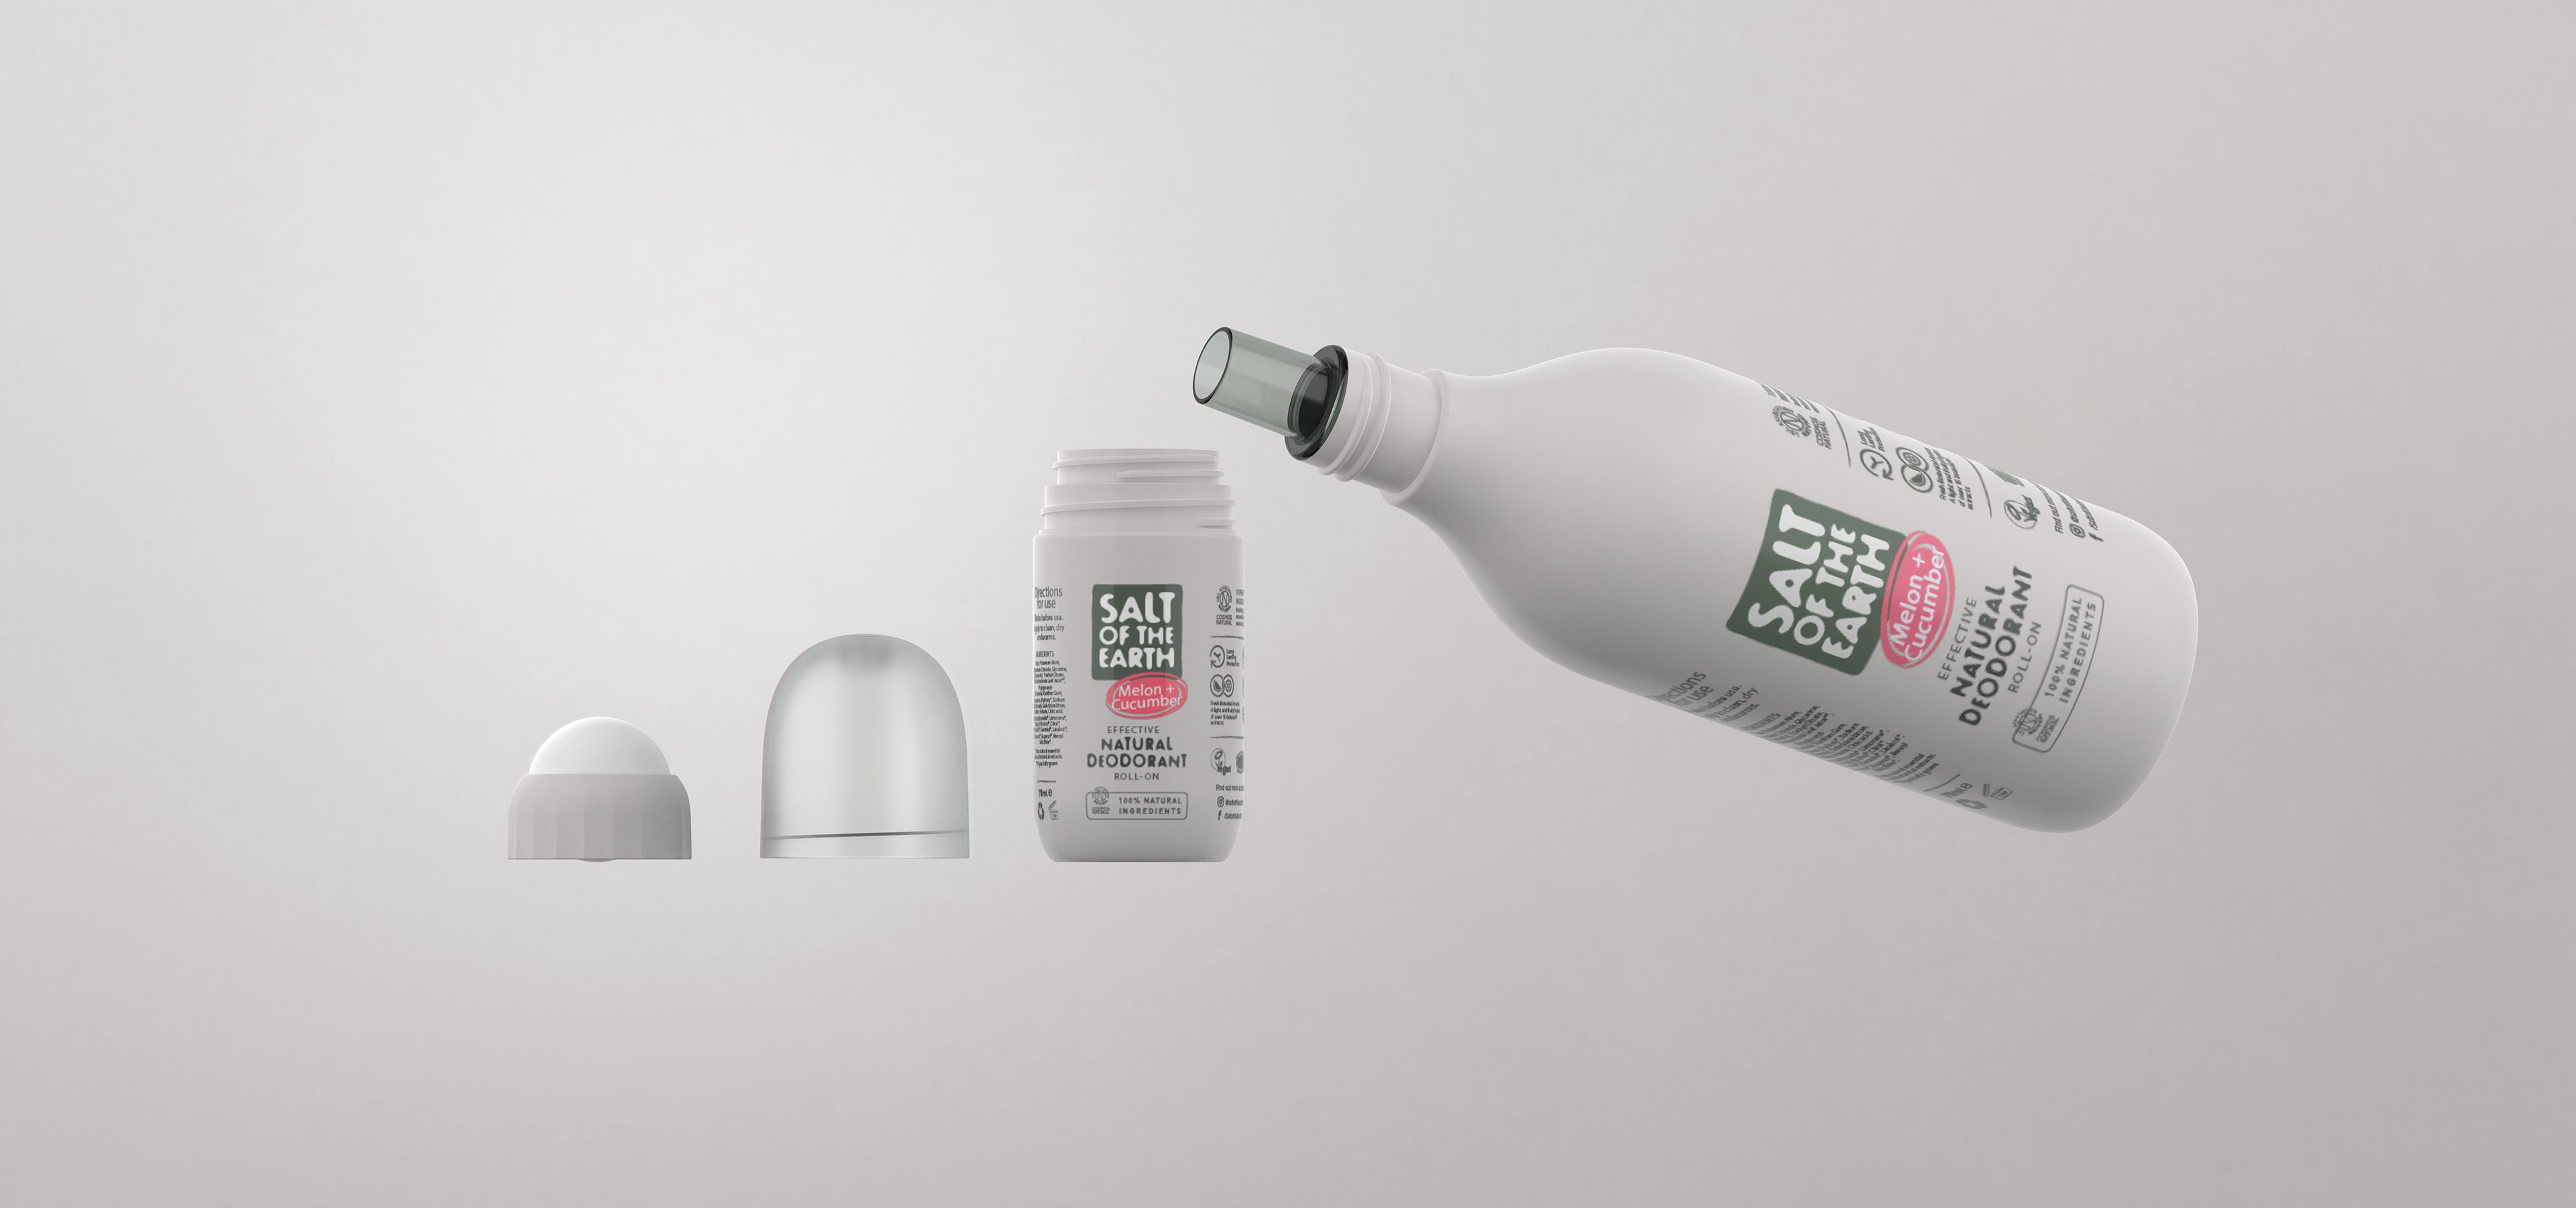 Drive growth with sustainable design. Salt of the Earth refillable roll-on deodorant and refill bottle system